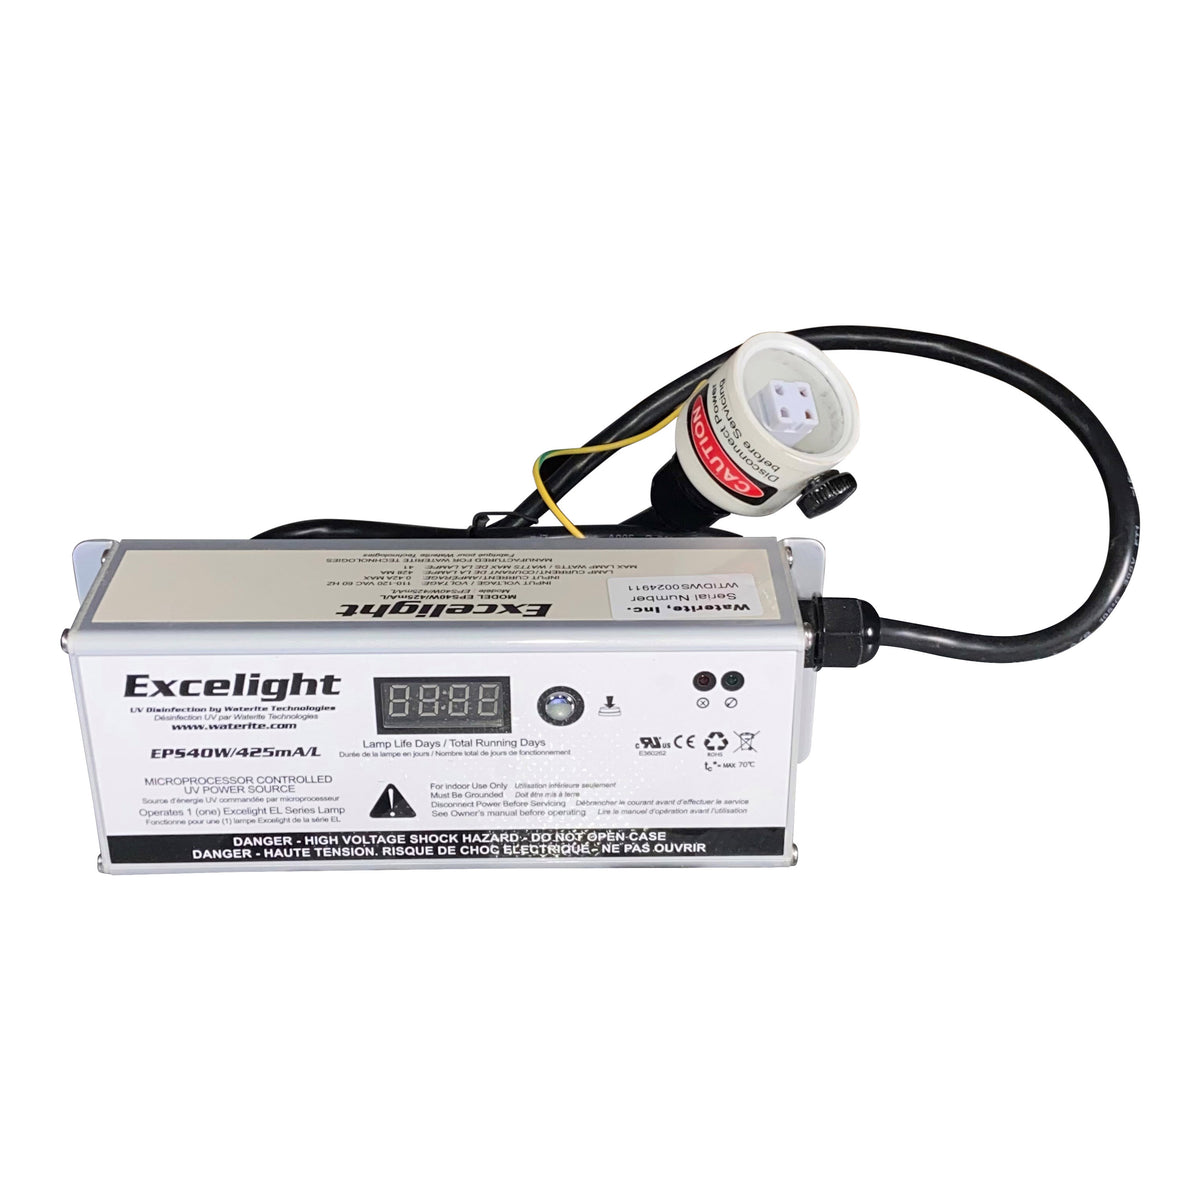 Excelight Ultraviolet Replacement Ballast | Free Ship